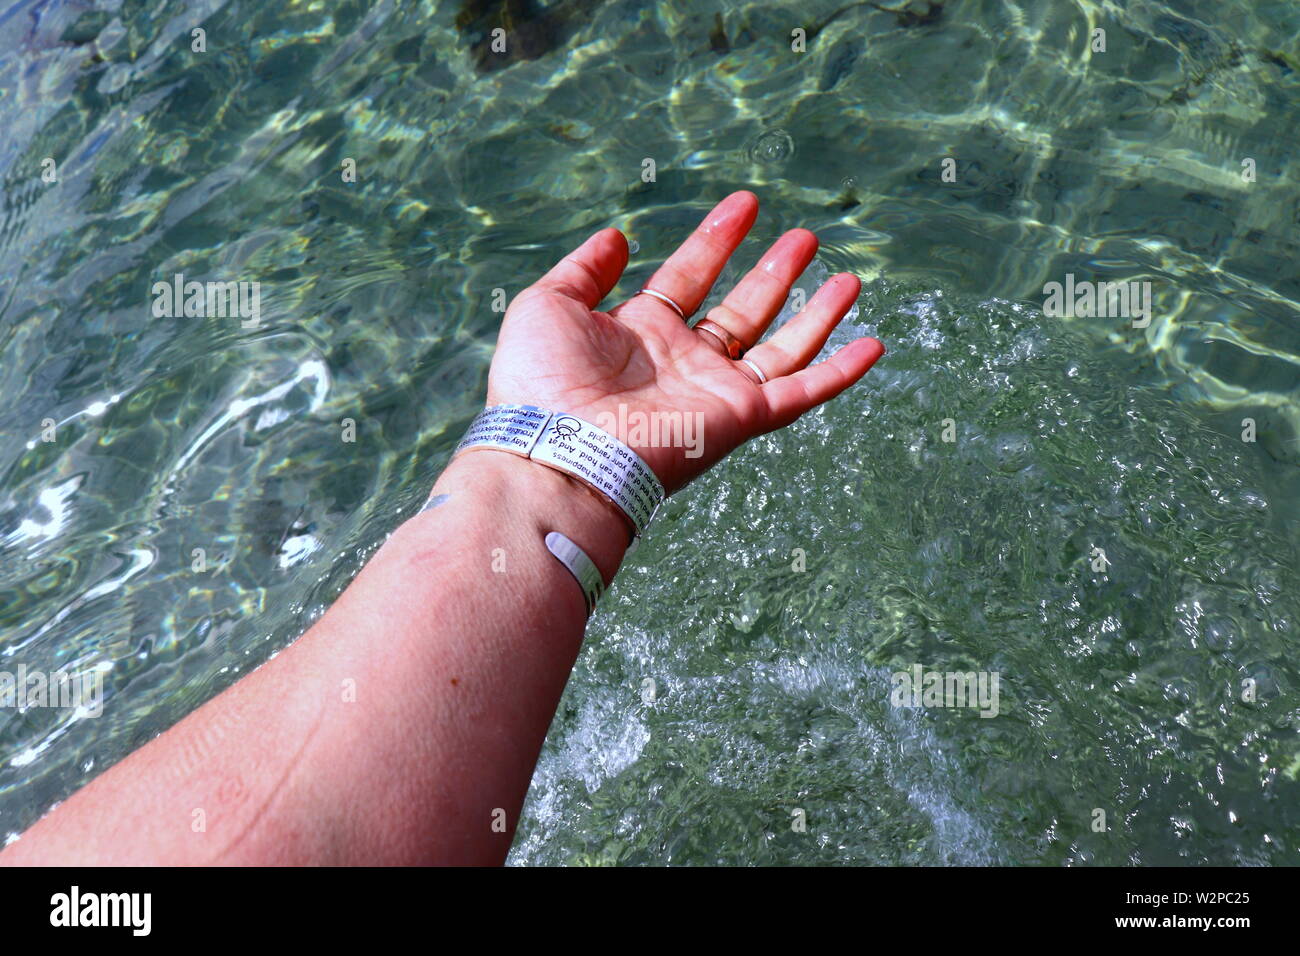 Woman's hand with silver bracelets and rings, splashing in ocean water Stock Photo